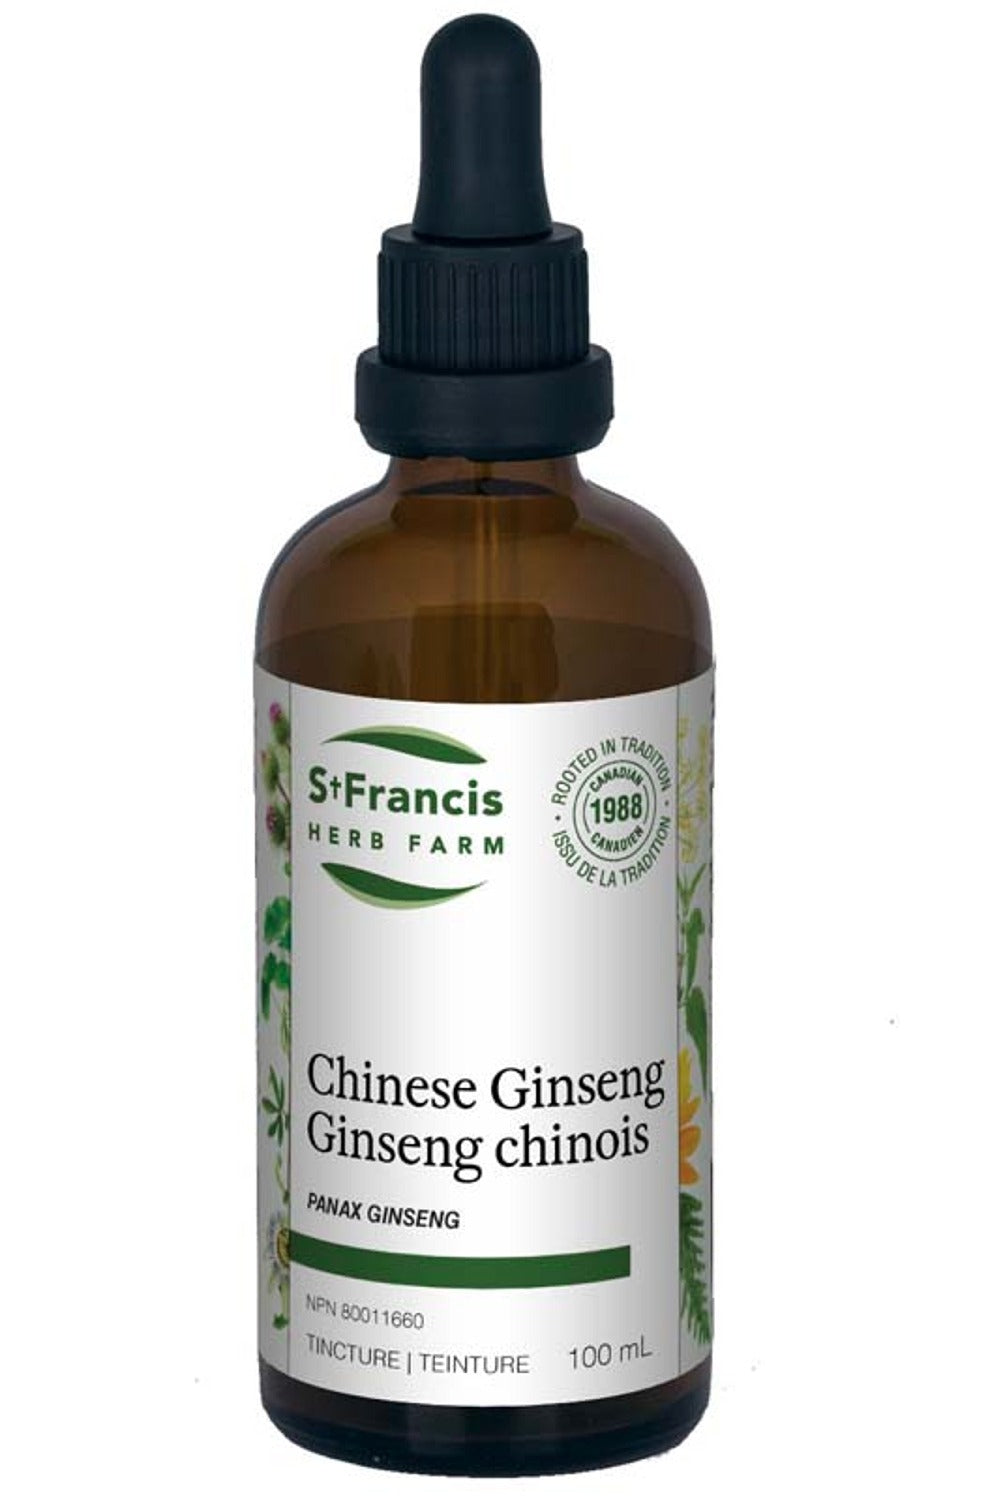 ST FRANCIS HERB FARM Chinese Ginseng ( ml